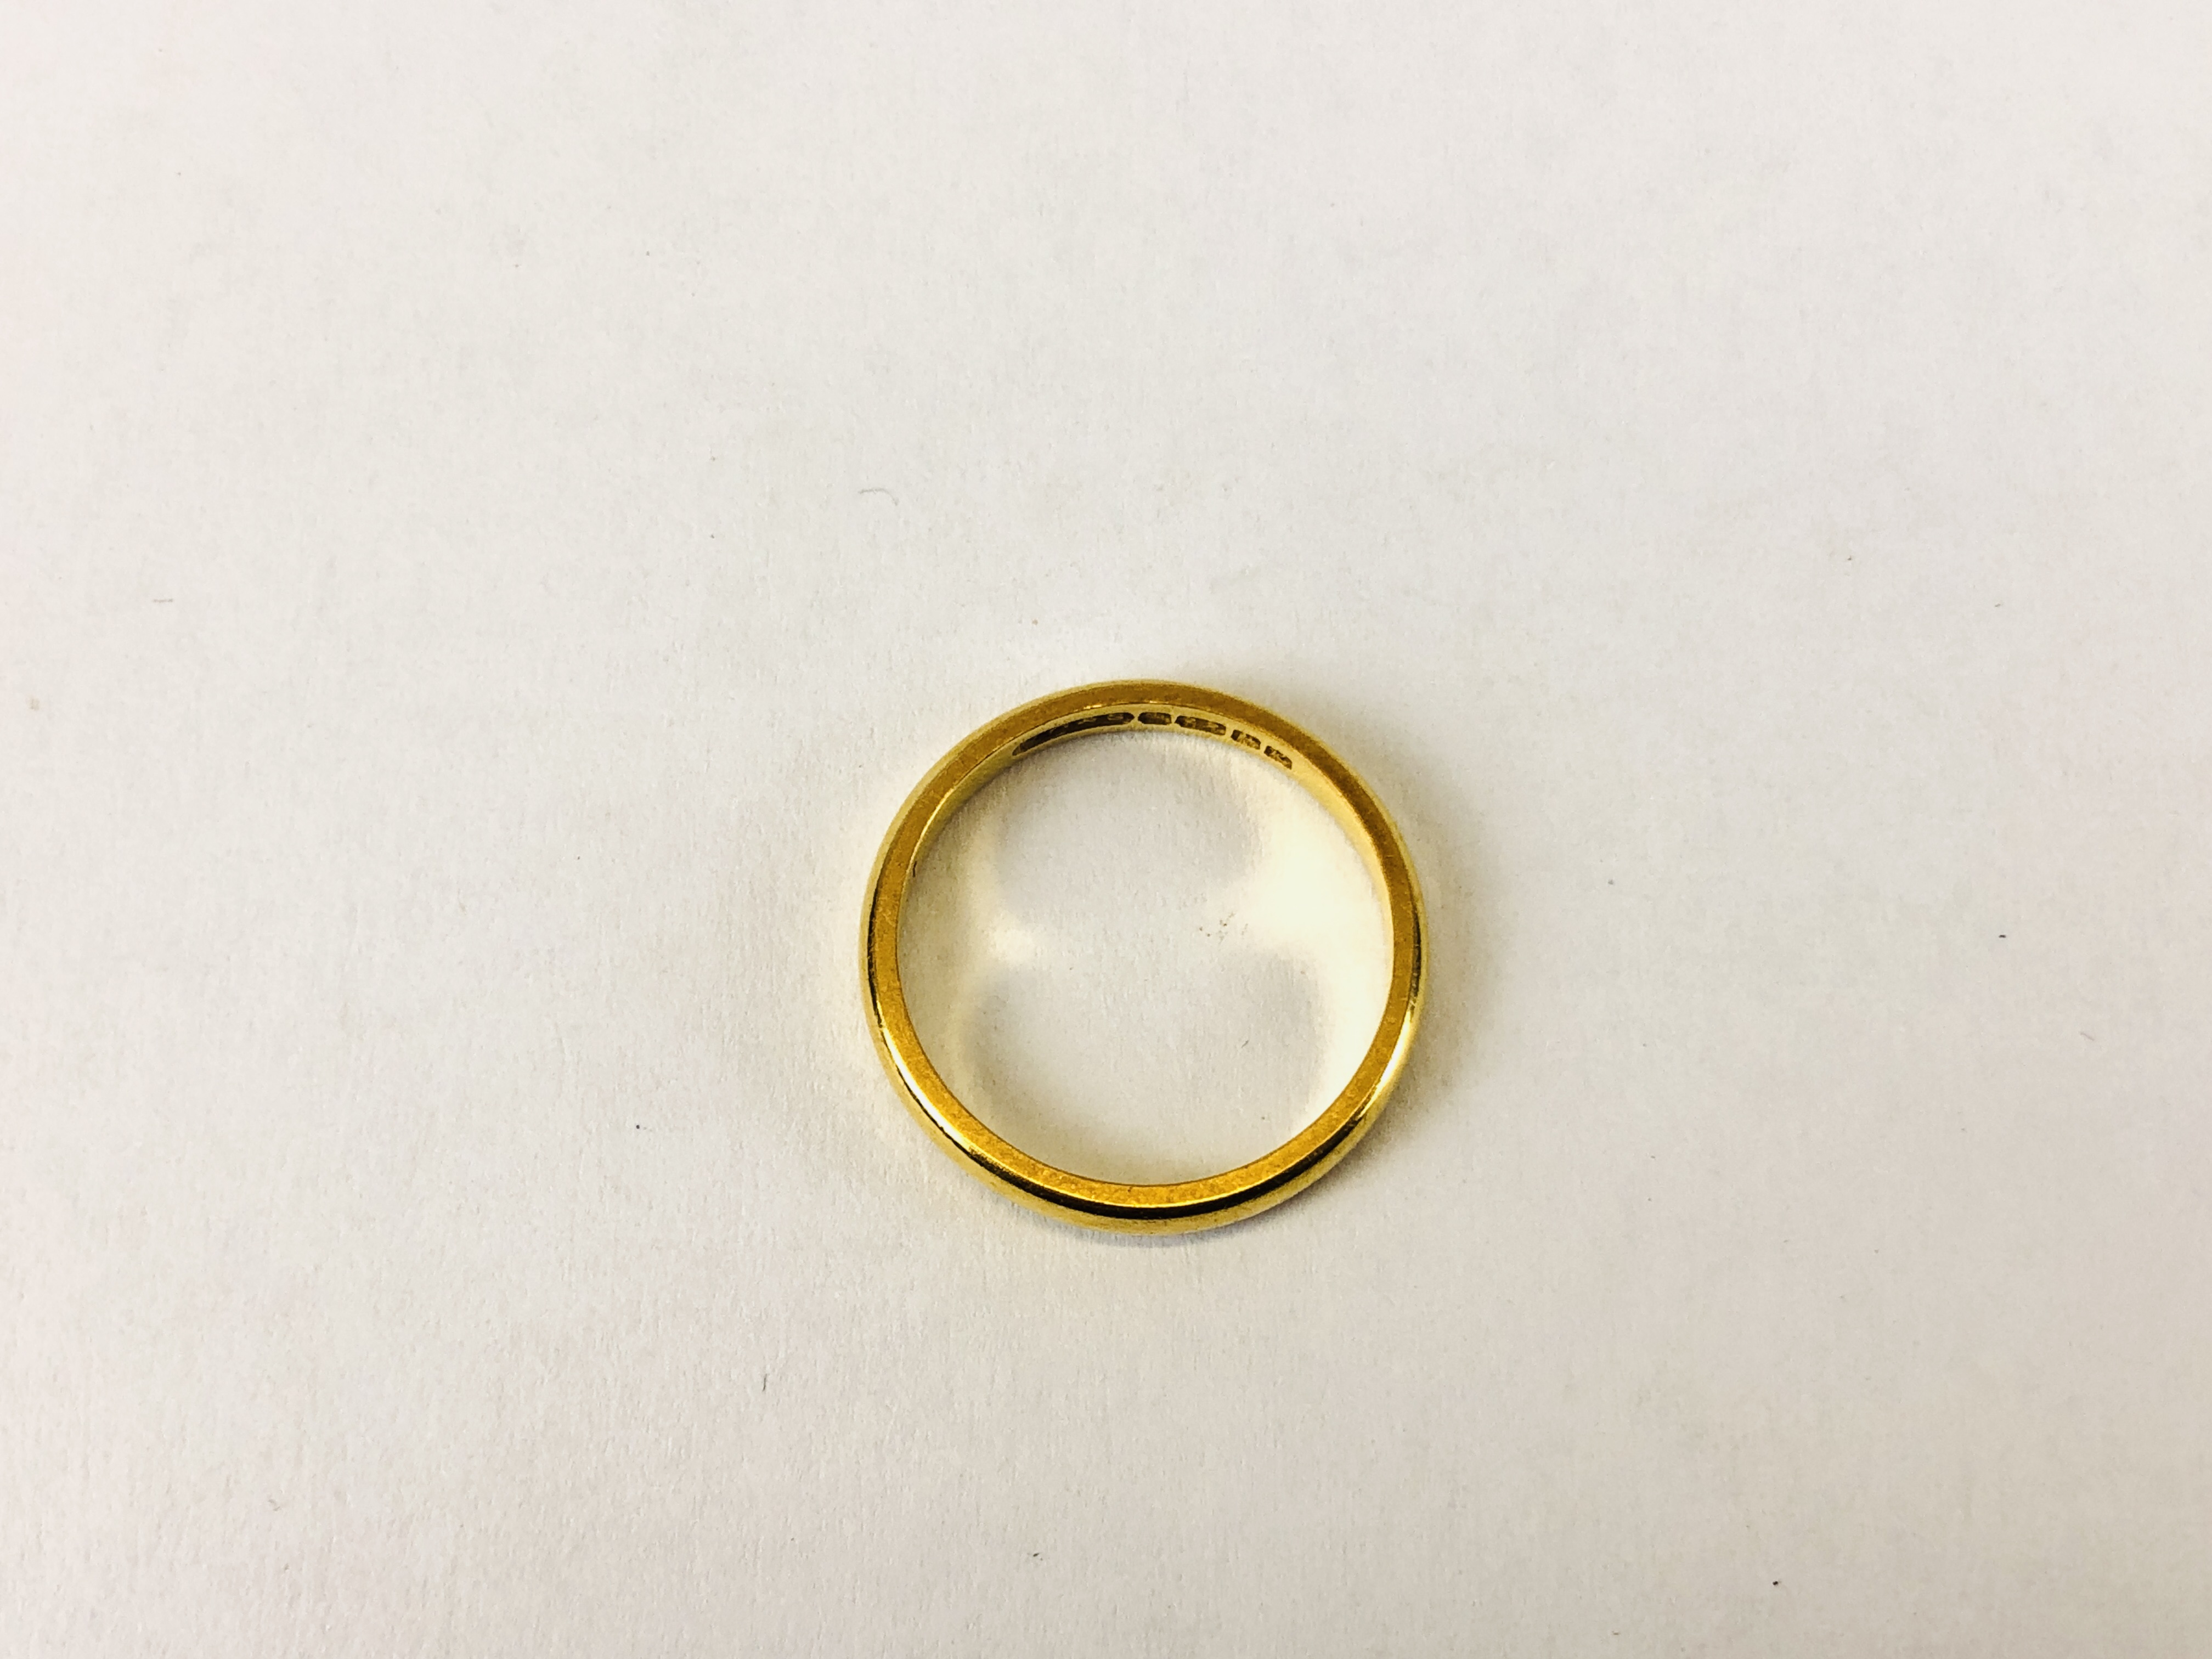 A 22CT GOLD WEDDING BAND. - Image 5 of 7